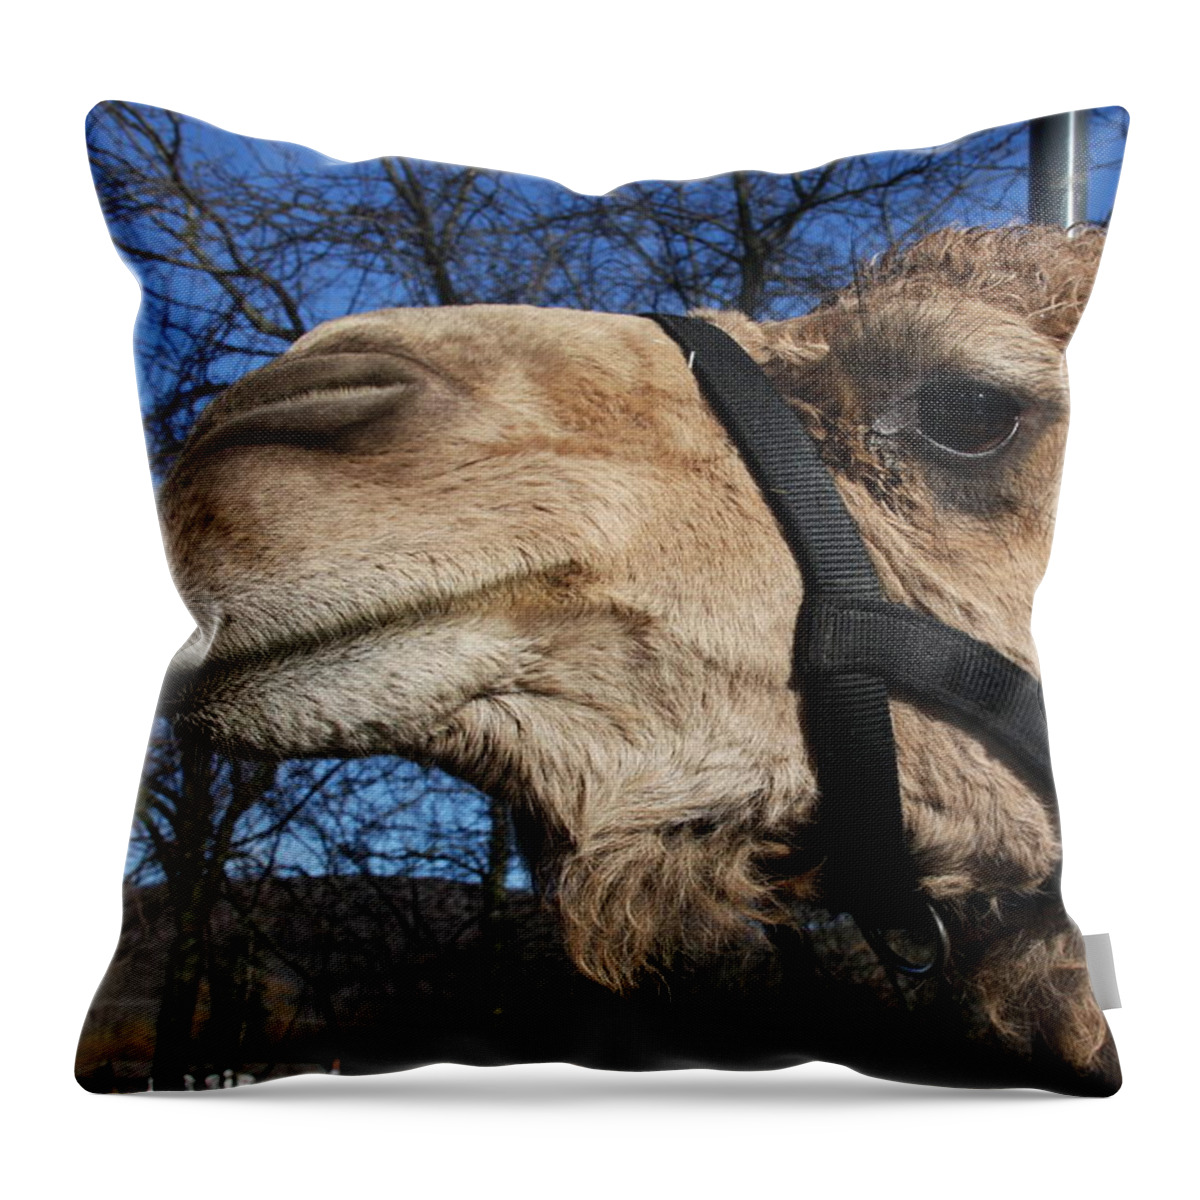 Camel Throw Pillow featuring the photograph Greetings by Vadim Levin